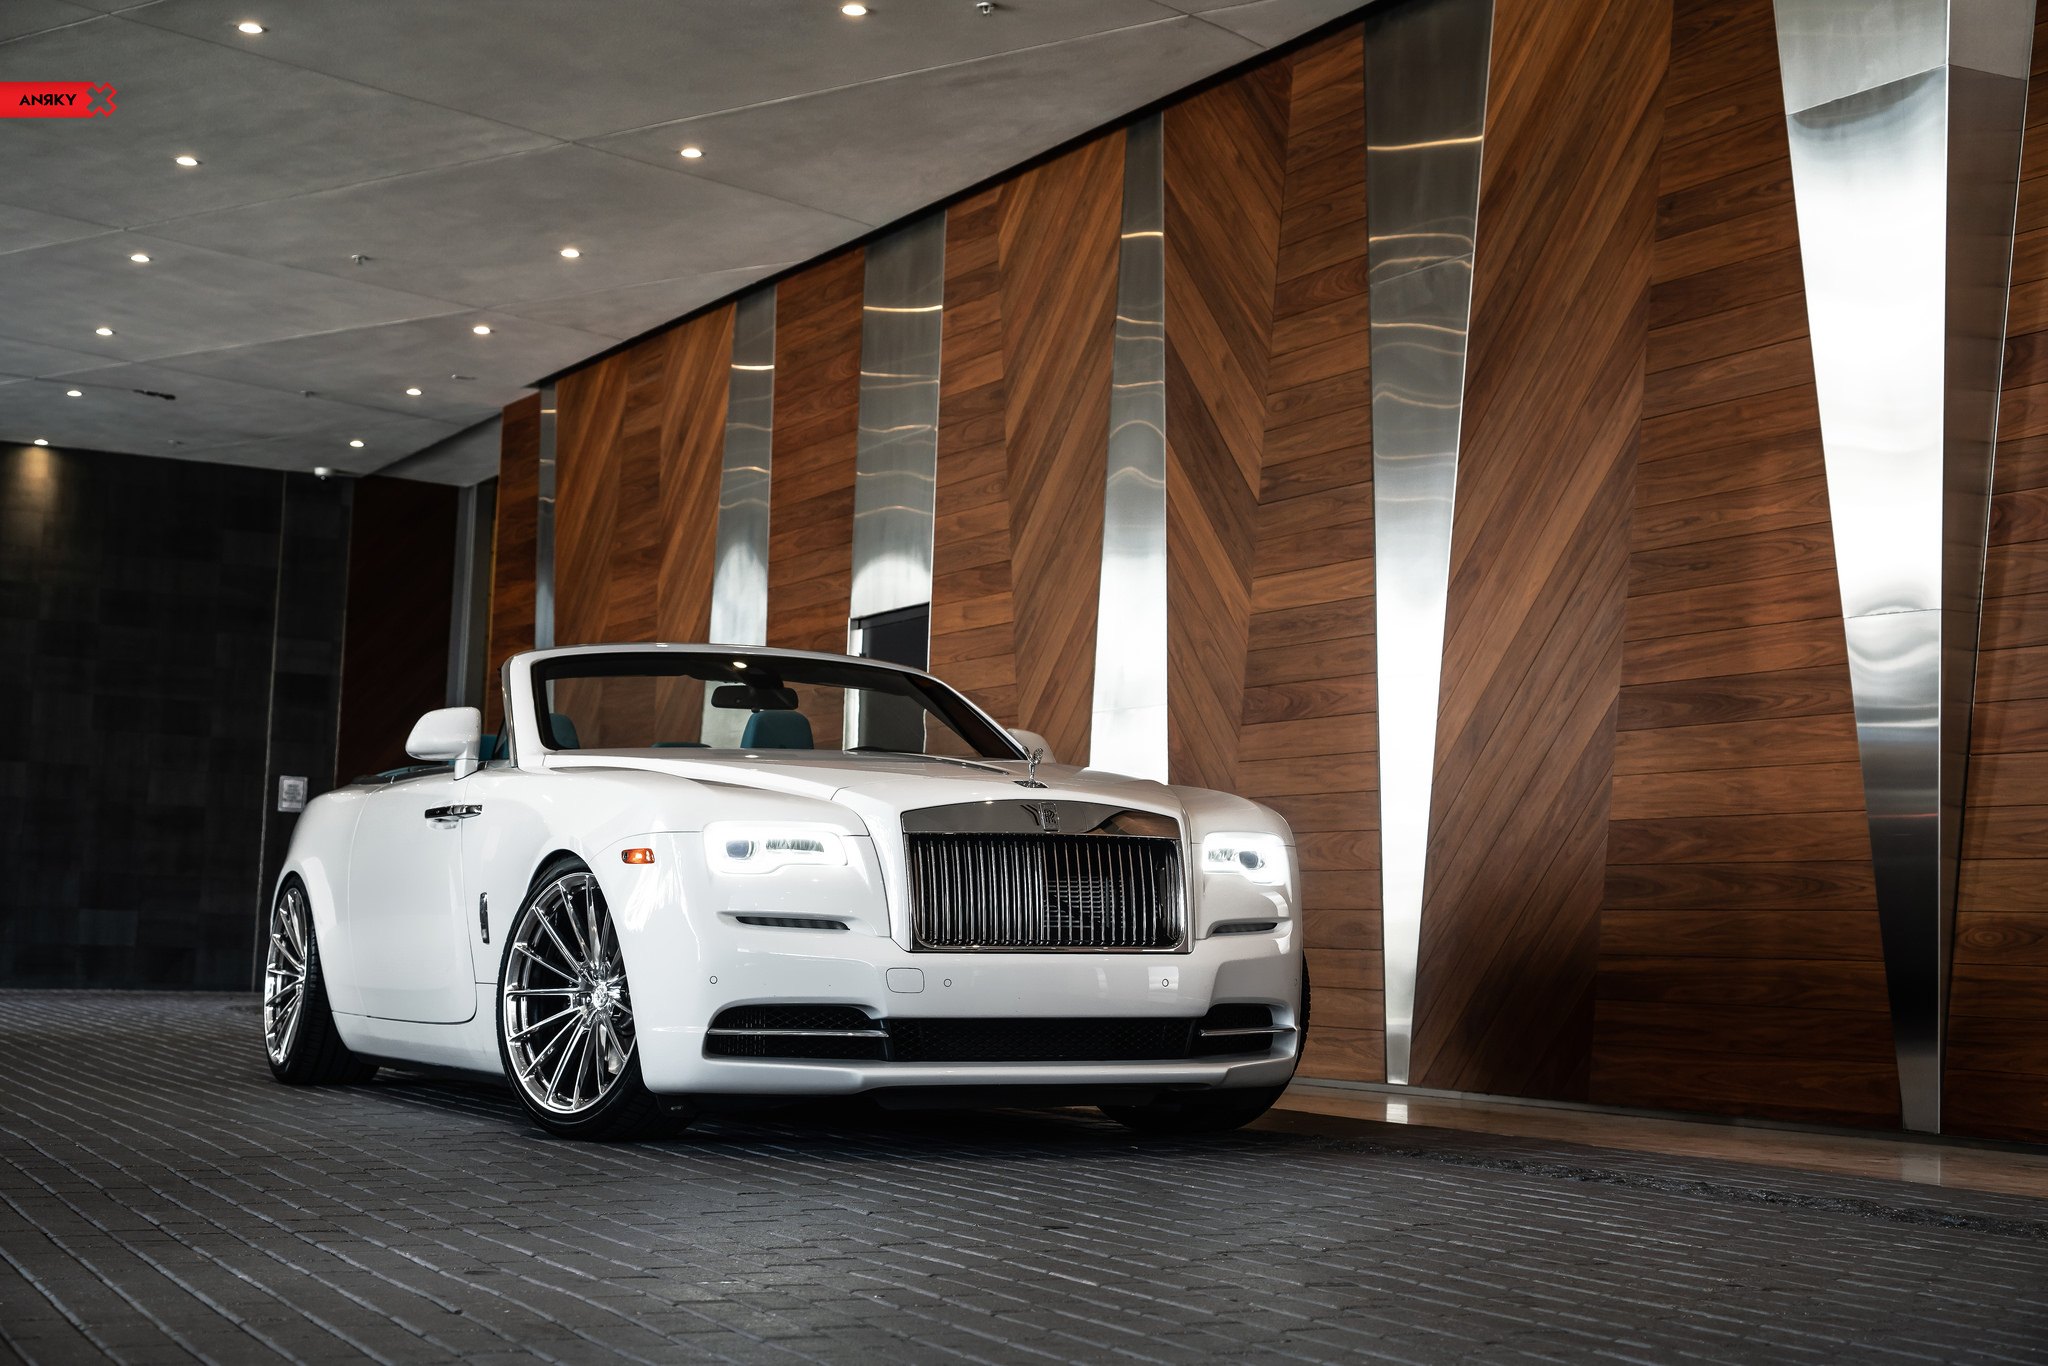 White Rolls Royce Dawn with Chrome Billet Grille - Photo by ANRKY Wheels